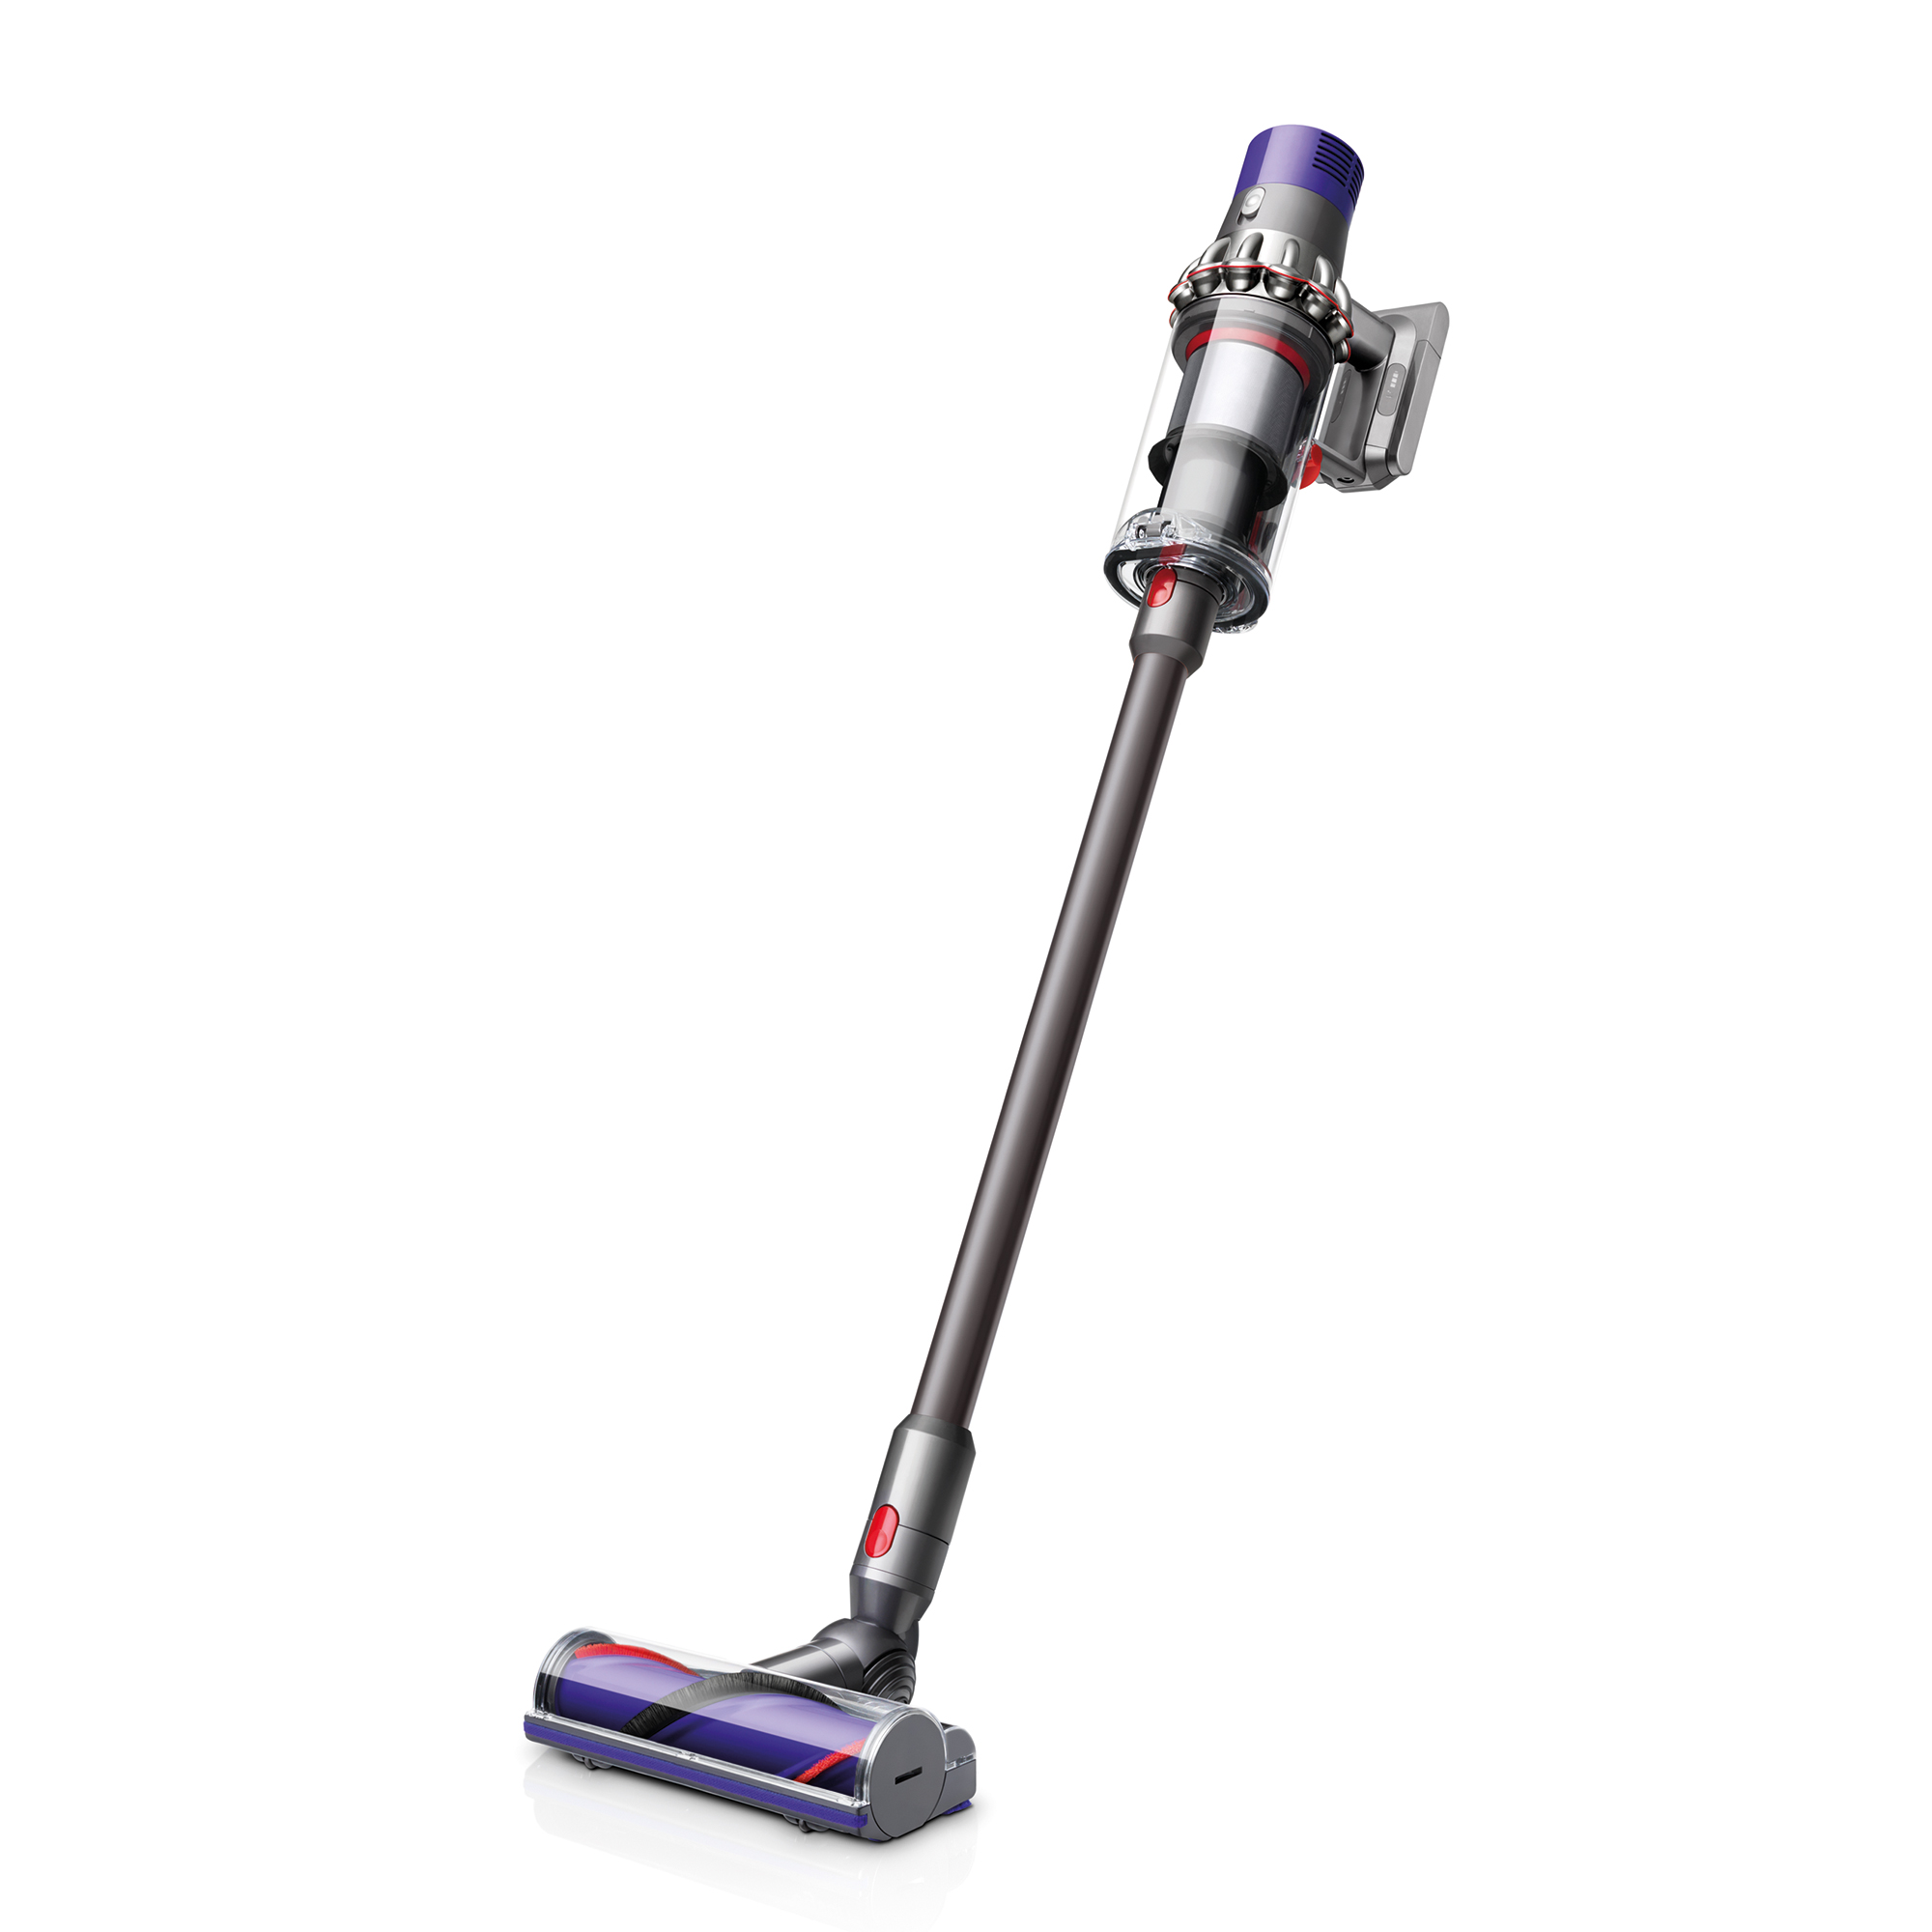 Dyson V10 Total Clean Cordfree Vacuum Cleaner| Iron | Refurbished - image 1 of 6